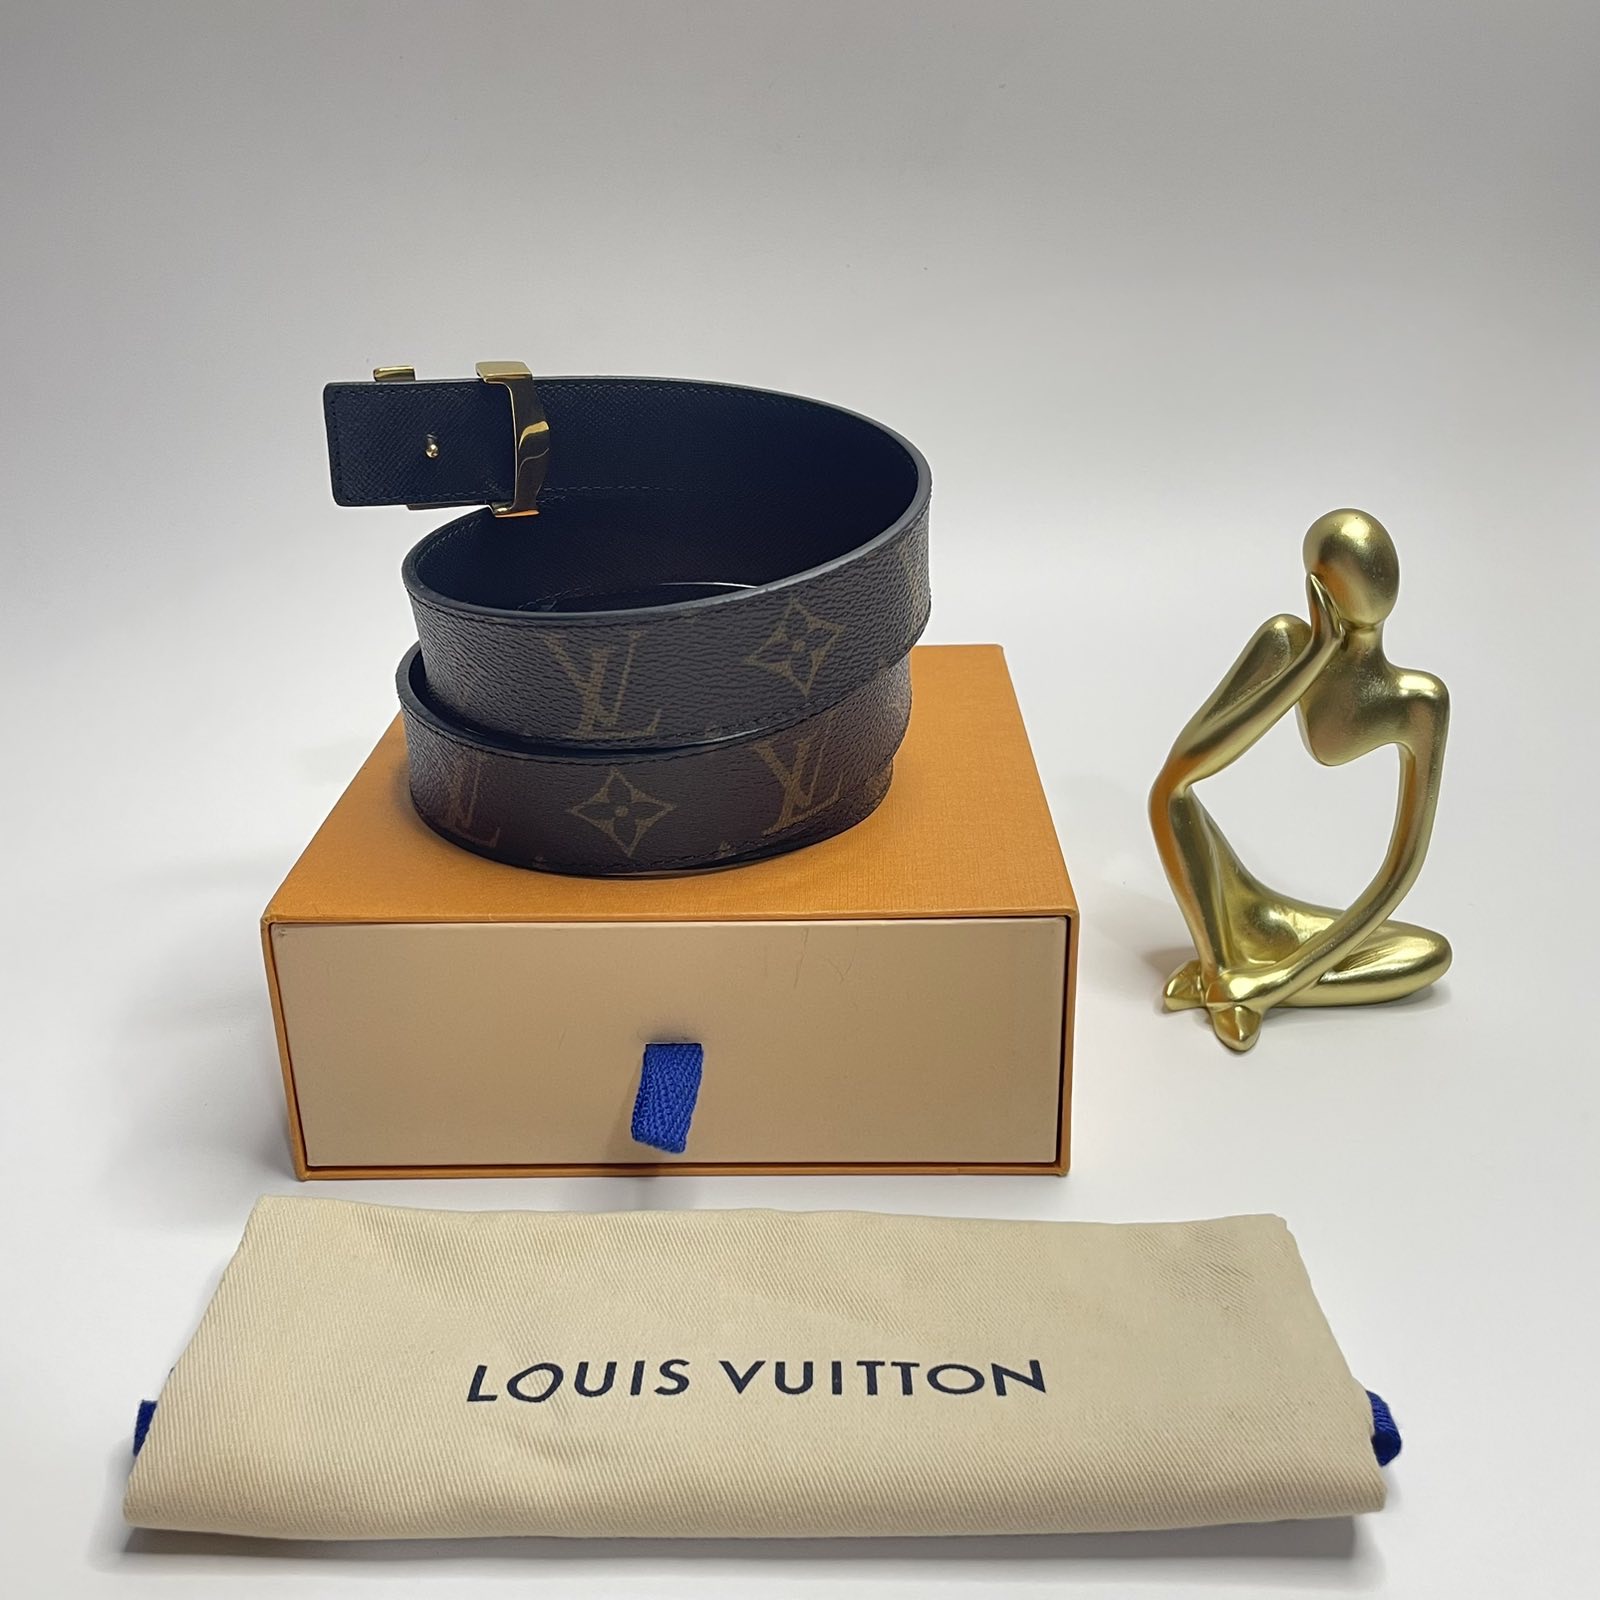 Louis Vuitton Reversible Belt Monogram/Black with Gold Buckle. Size 95 cm.  Made in Spain. With dustbag & box ❤️